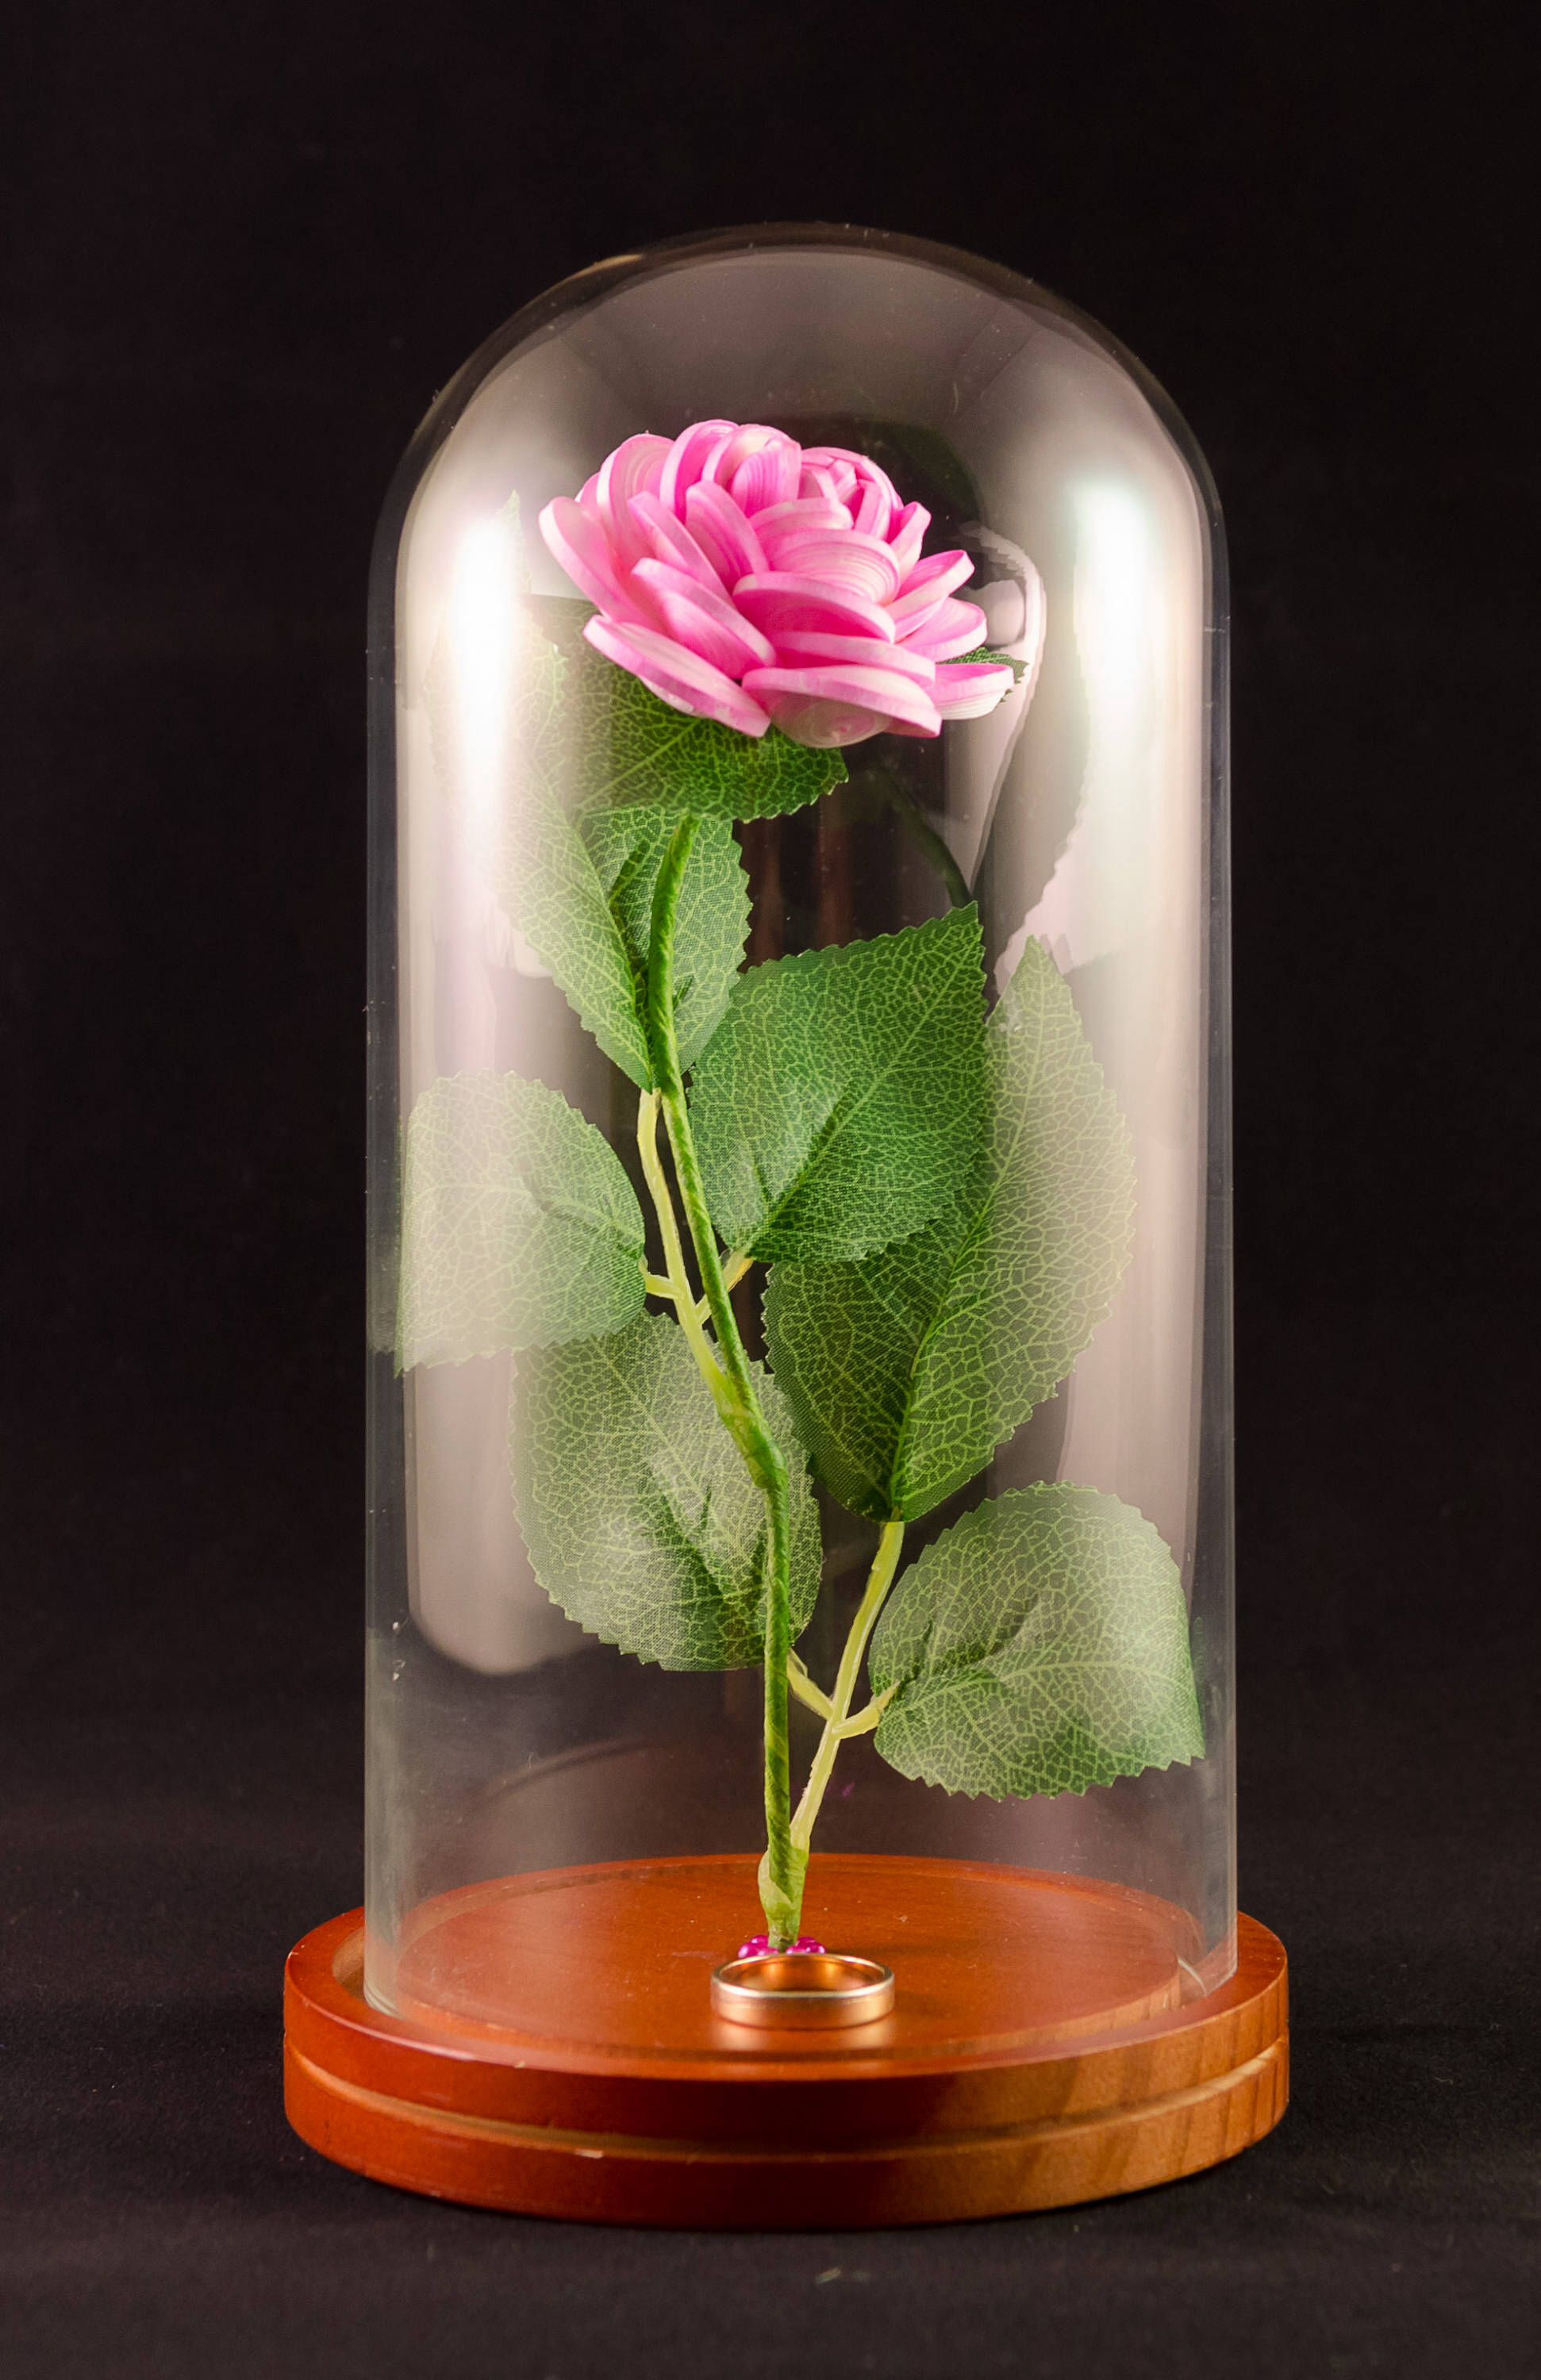 flower vase from beauty and the beast of pin by elvir eli on baddie pinterest etsy beauty and the beast regarding beauty and the beast rose unique proposal ideas disney flower gift quilling pink